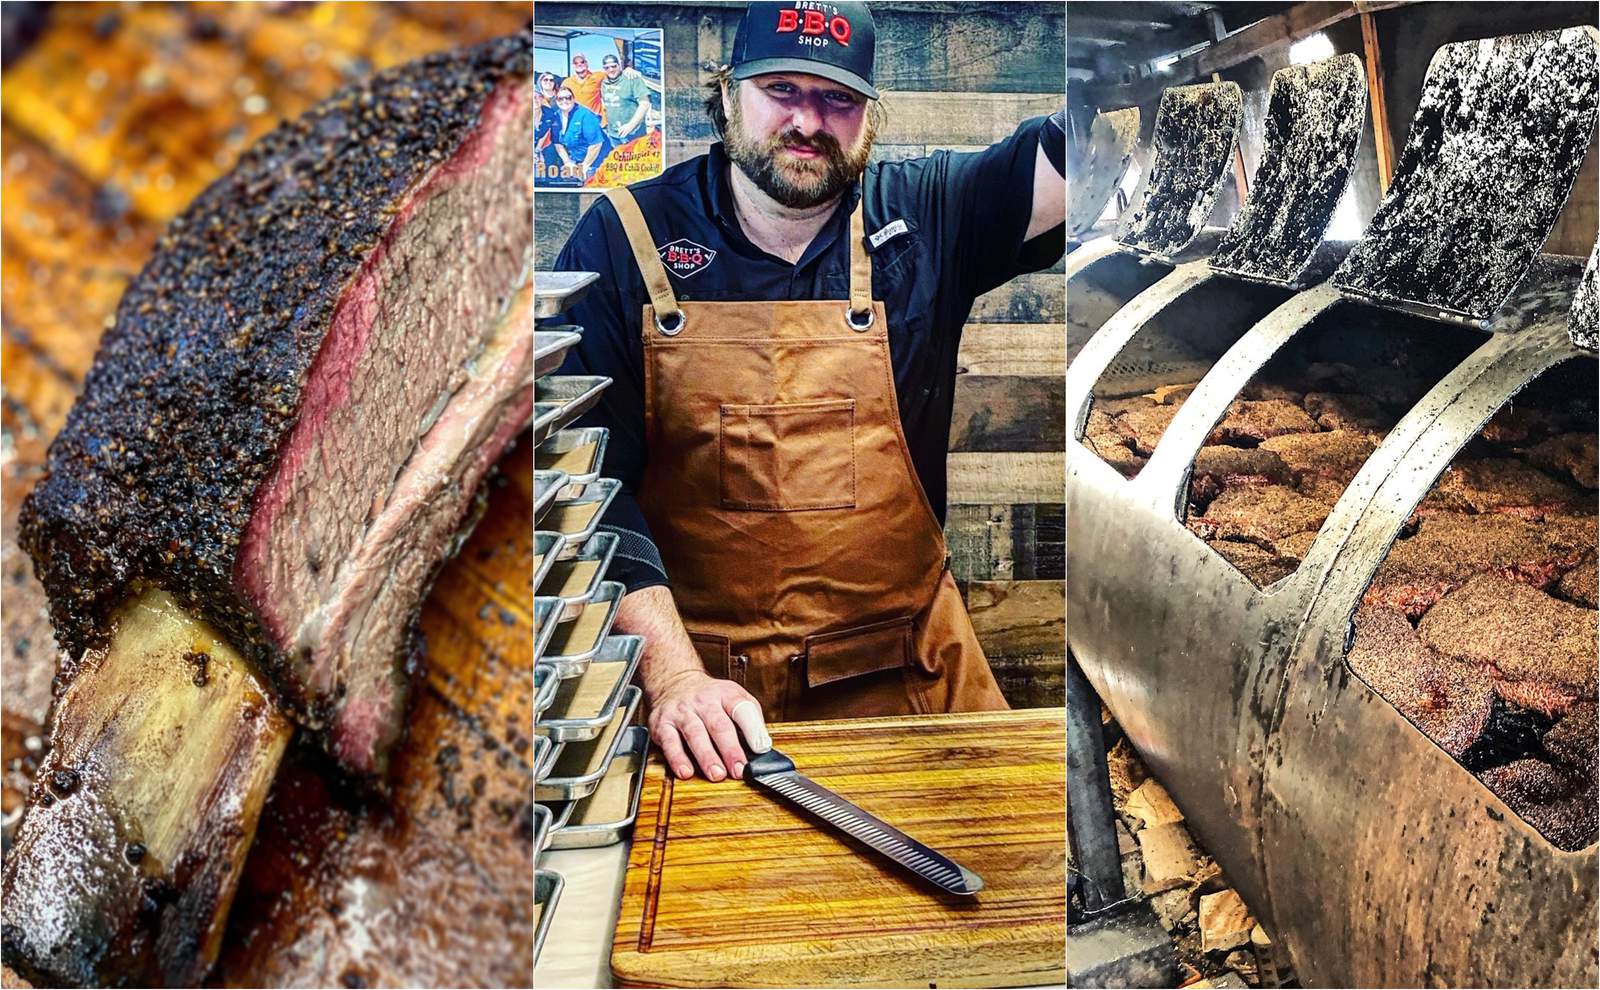 Taste of Houston: How Brett’s Barbecue Shop helped catapult Katy into the local BBQ scene